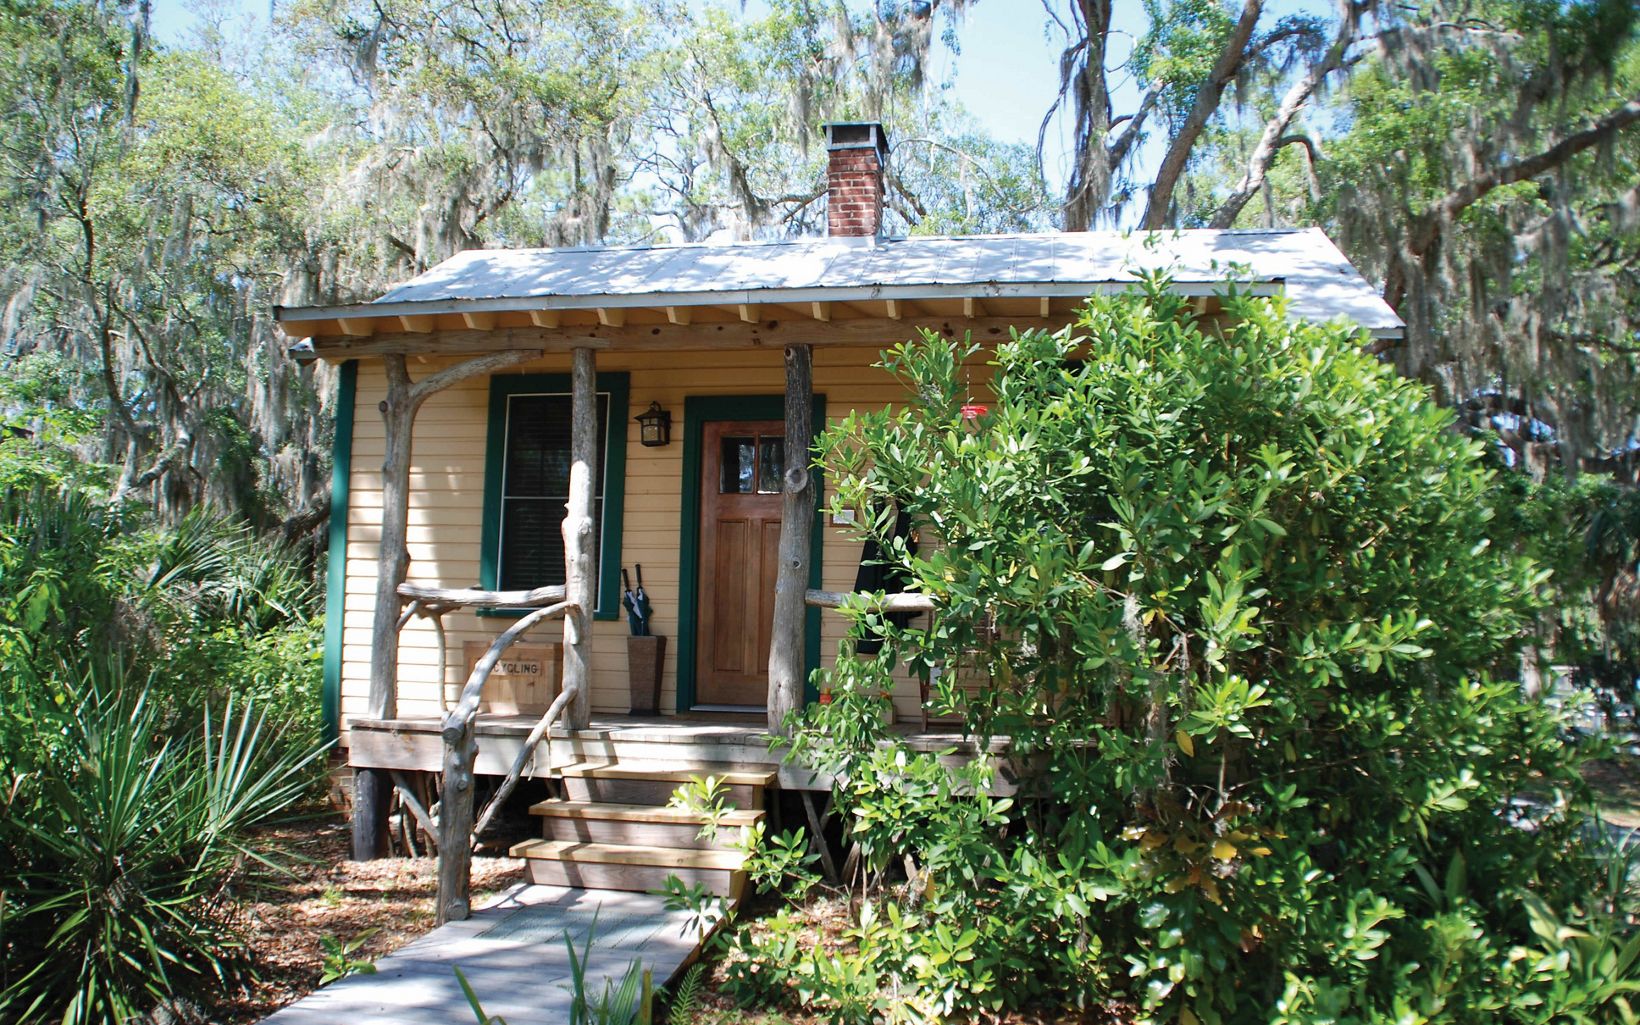 A small cabin accommodation on Little St. Simons Island nestles amongst green grasses and trees draped in spanish moss.